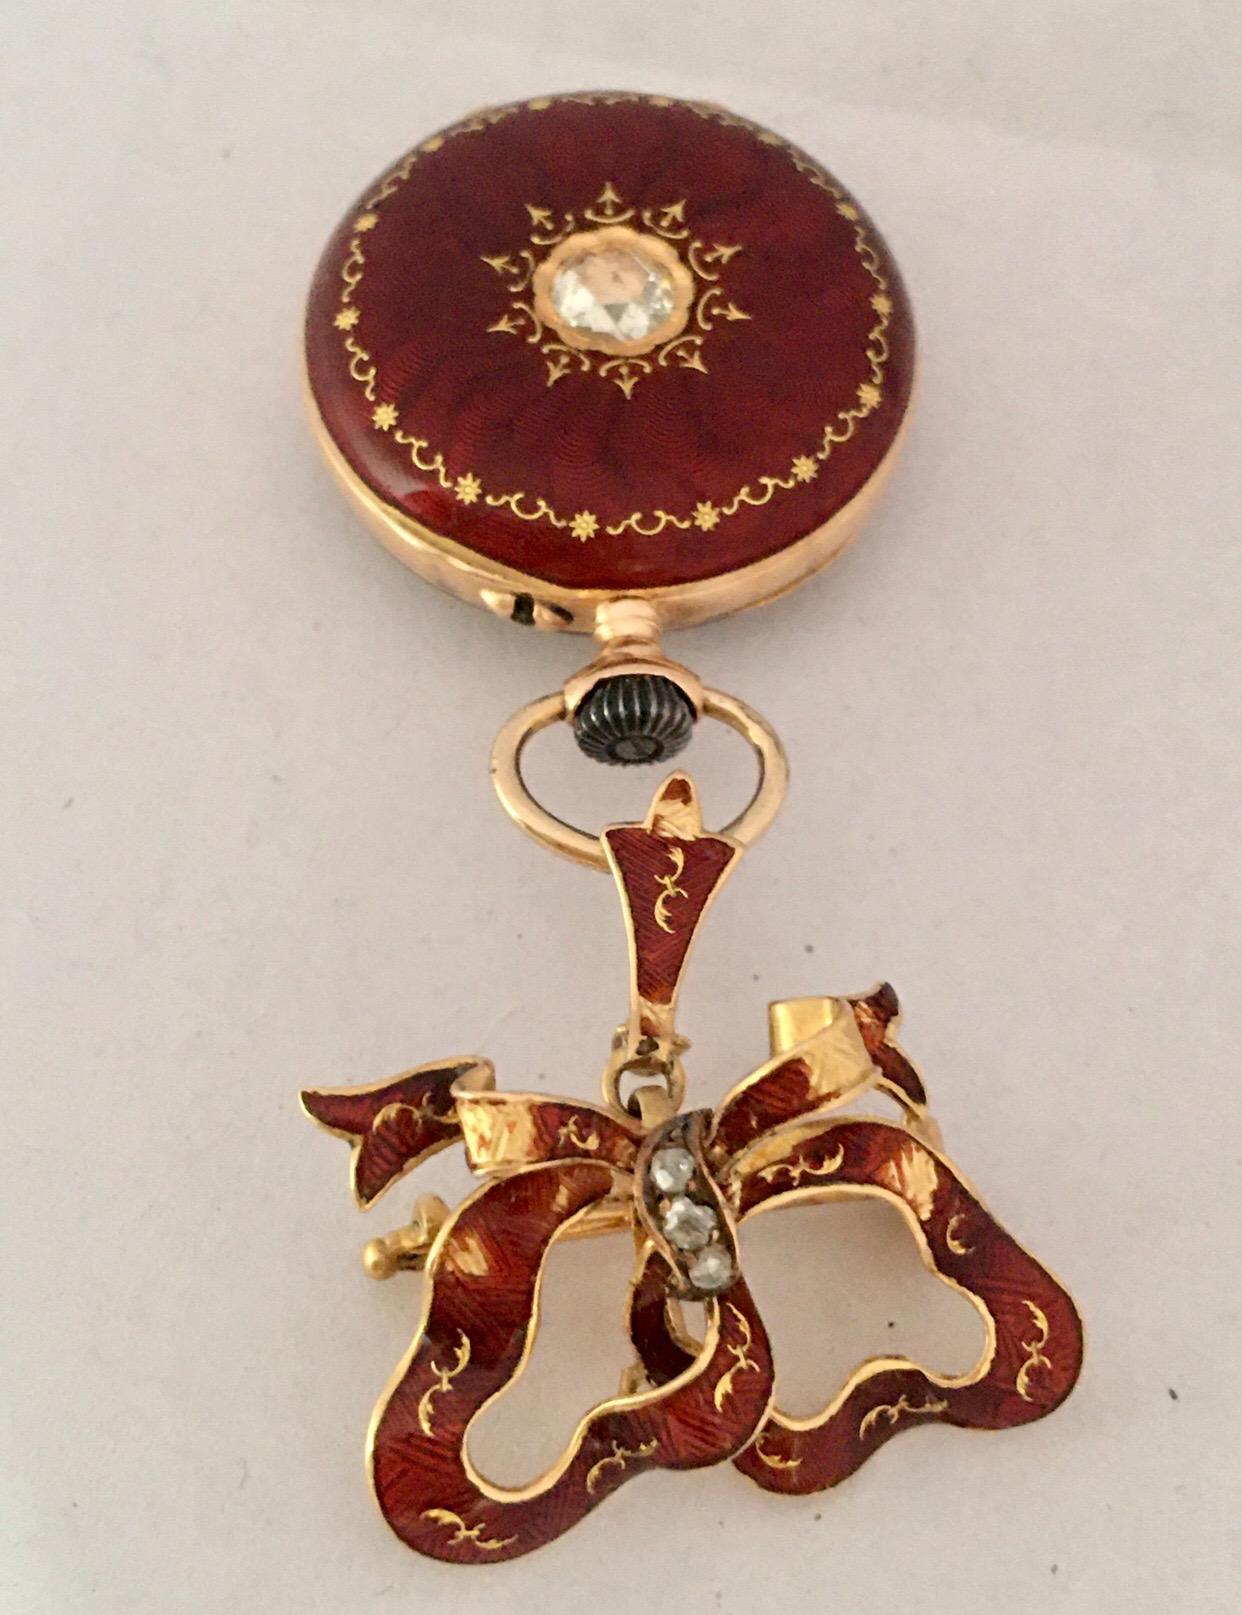 Ball Cut 14 Karat Gold and Diamonds Red Enamel Mechanical Ladies Fob or Brooch Watch For Sale